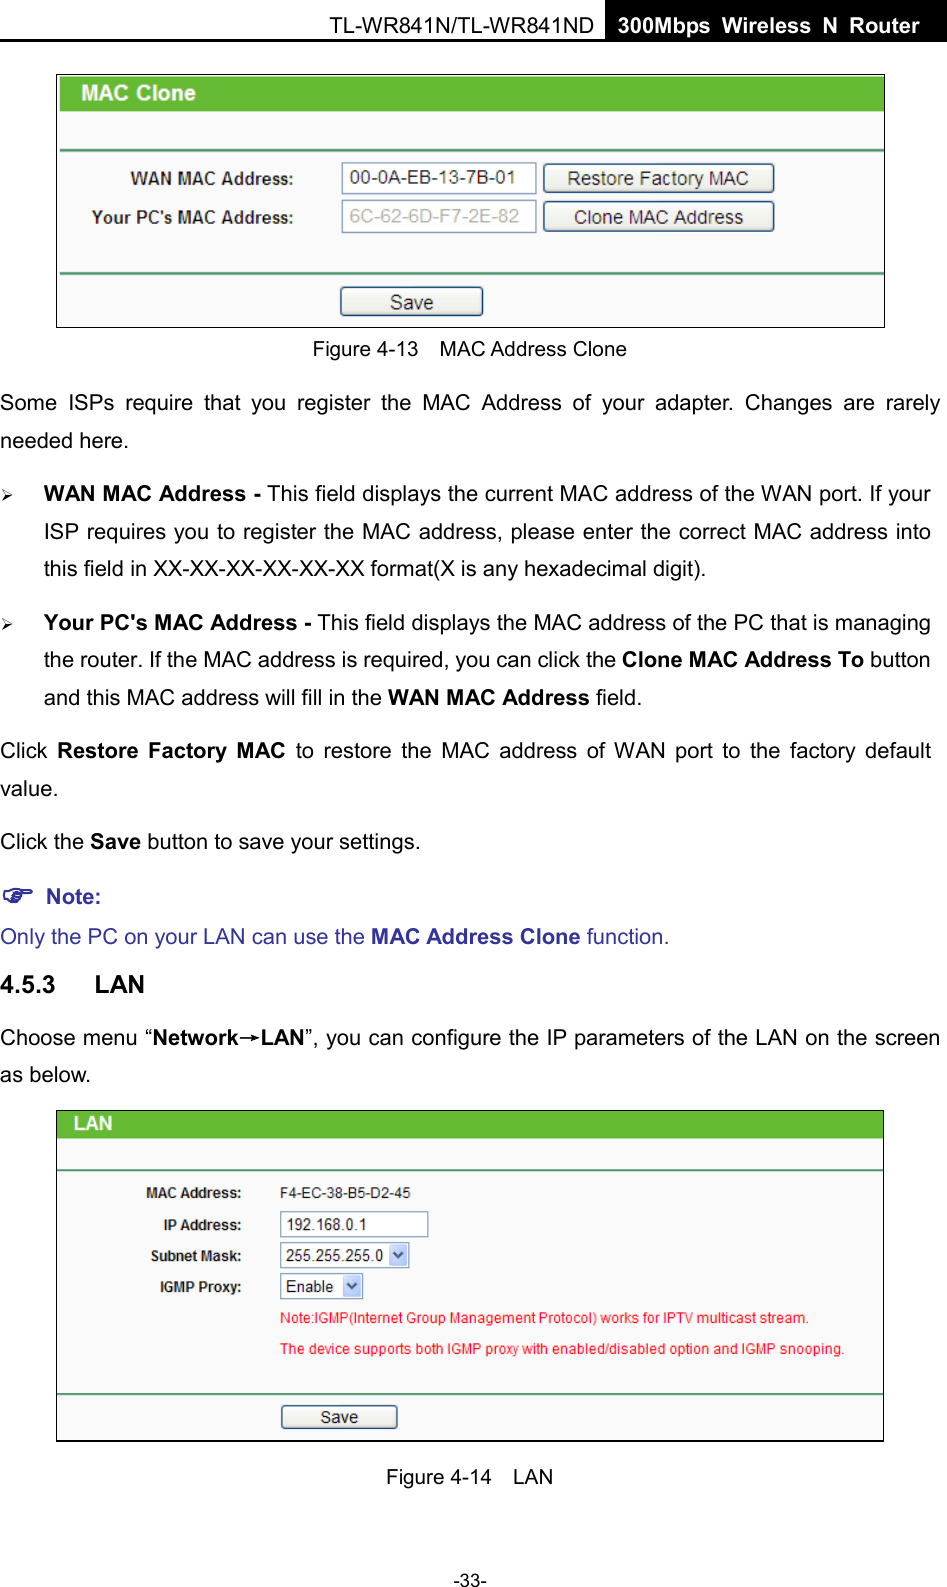 TL-WR841N/TL-WR841ND  300Mbps Wireless N Router Figure 4-13  MAC Address Clone Some ISPs require that you register the MAC Address of your adapter.  Changes are rarely needed here. WAN MAC Address - This field displays the current MAC address of the WAN port. If yourISP requires you to register the MAC address, please enter the correct MAC address intothis field in XX-XX-XX-XX-XX-XX format(X is any hexadecimal digit).Your PC&apos;s MAC Address - This field displays the MAC address of the PC that is managingthe router. If the MAC address is required, you can click the Clone MAC Address To buttonand this MAC address will fill in the WAN MAC Address field.Click  Restore Factory MAC to restore the MAC address of WAN port to the factory default value. Click the Save button to save your settings.  Note:Only the PC on your LAN can use the MAC Address Clone function. 4.5.3 LAN Choose menu “Network→LAN”, you can configure the IP parameters of the LAN on the screen as below. Figure 4-14  LAN -33- 